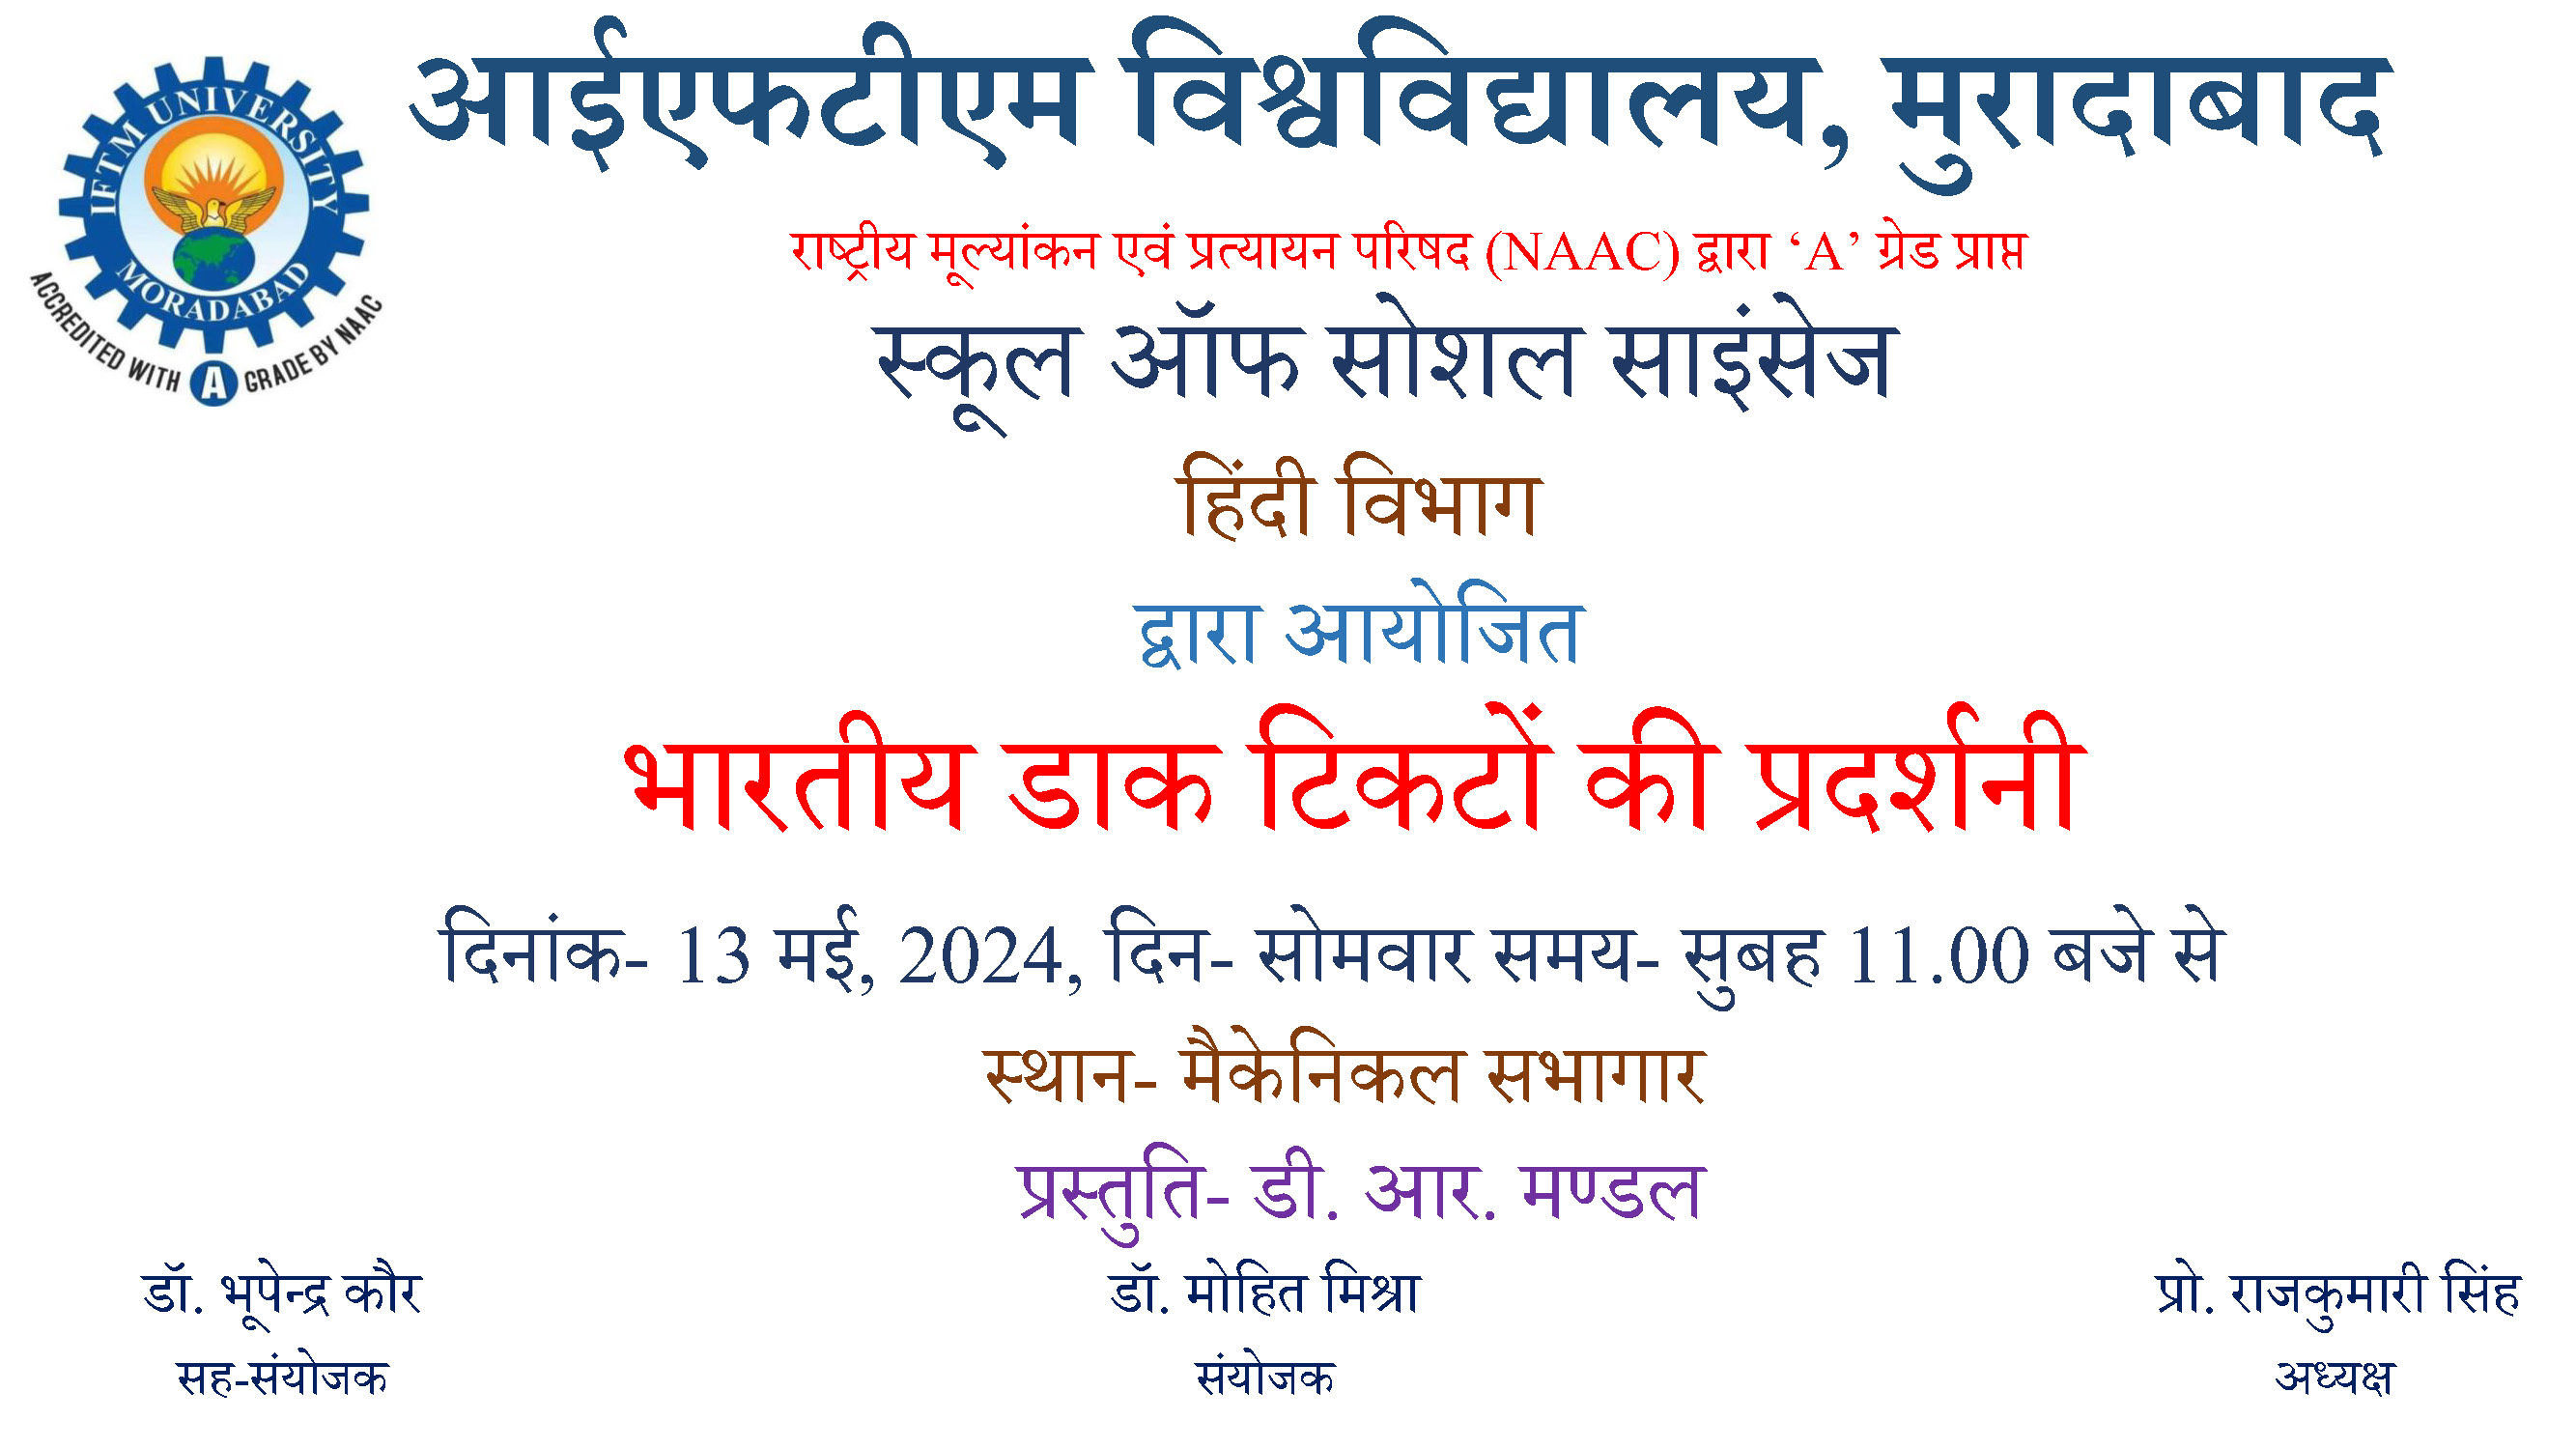 Exhibition of Indian Postage Stamps